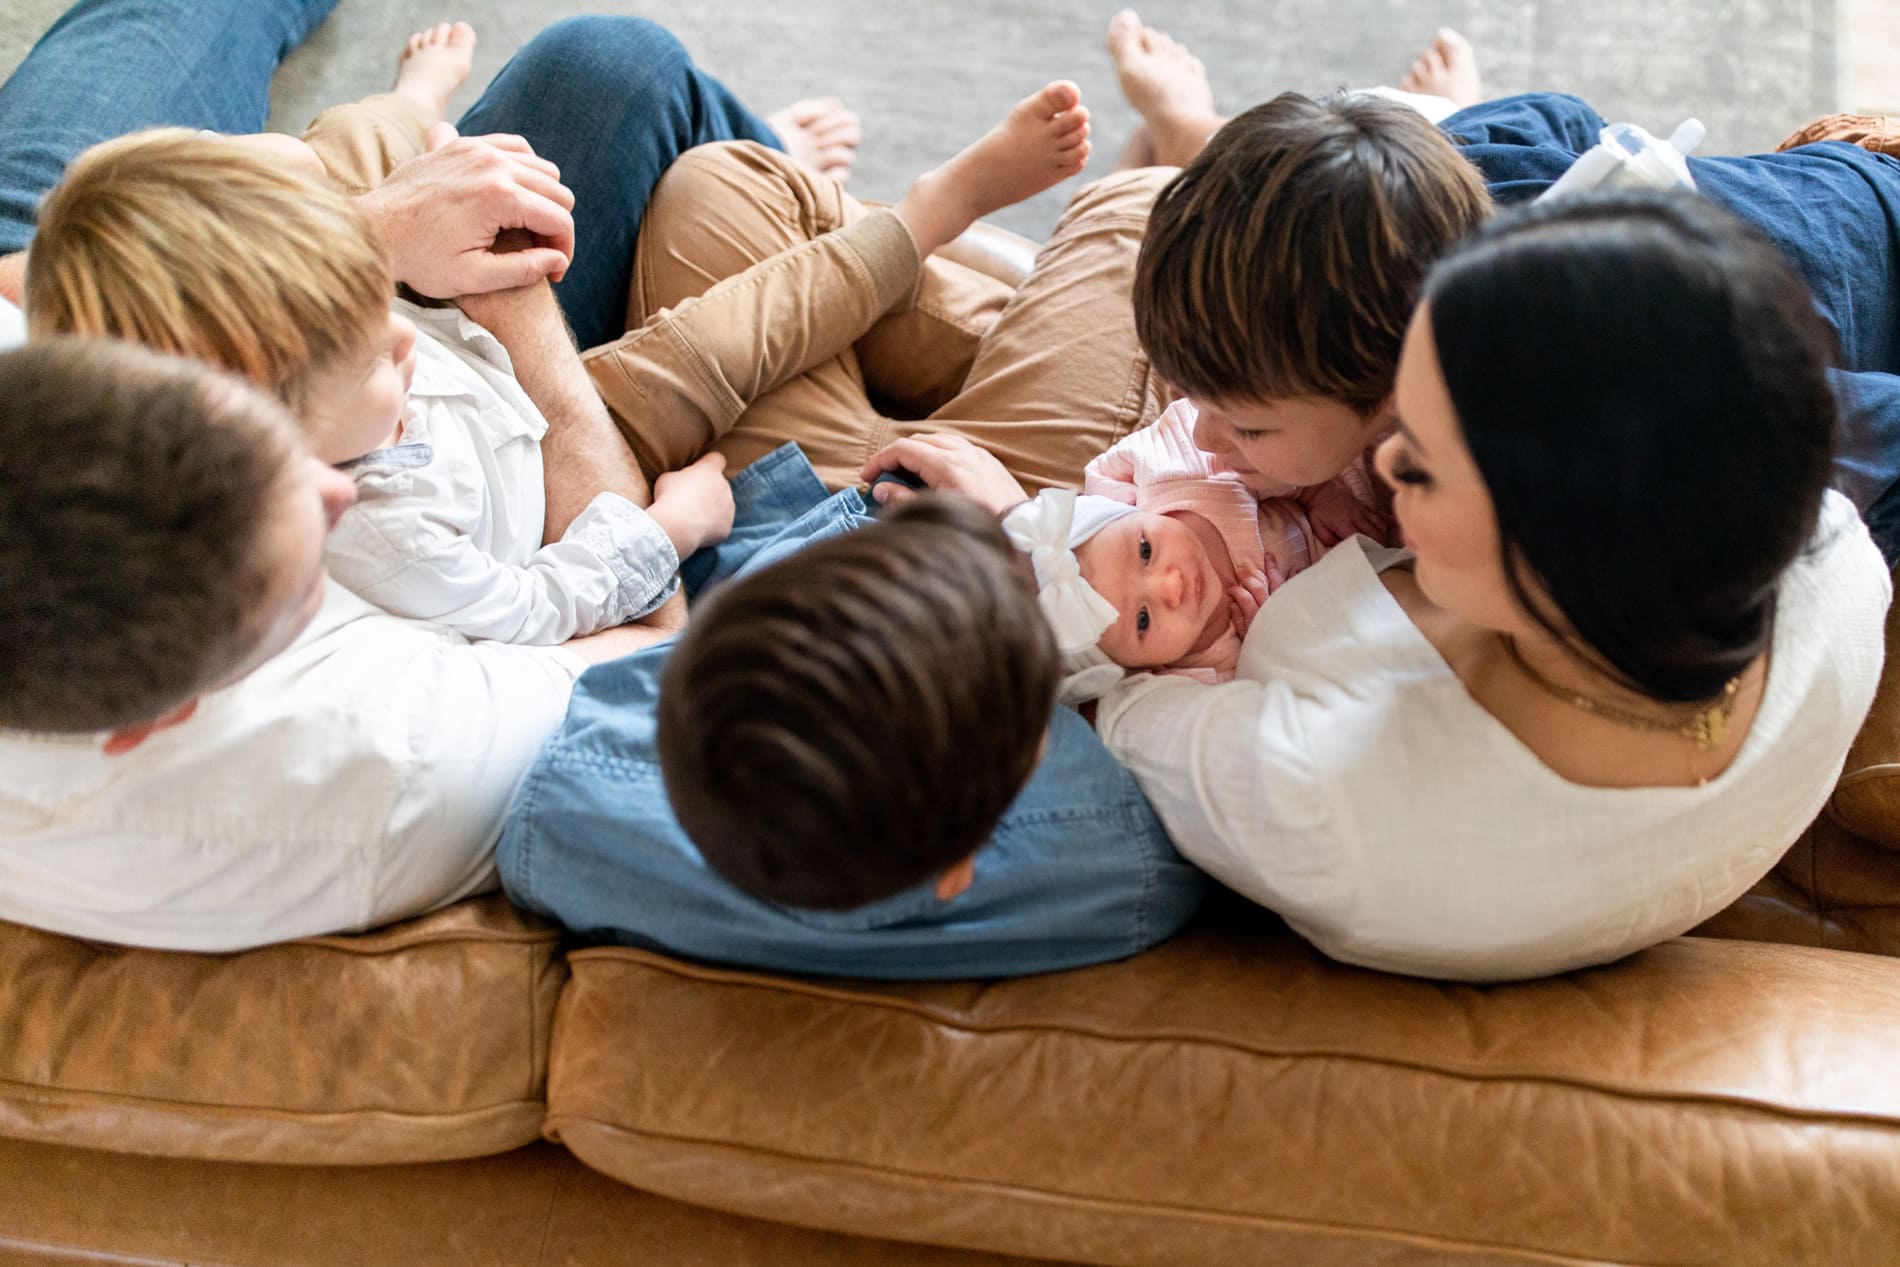 Family Photographer, a mother, father, and young kids cuddle on the couch together as they welcome a newborn baby